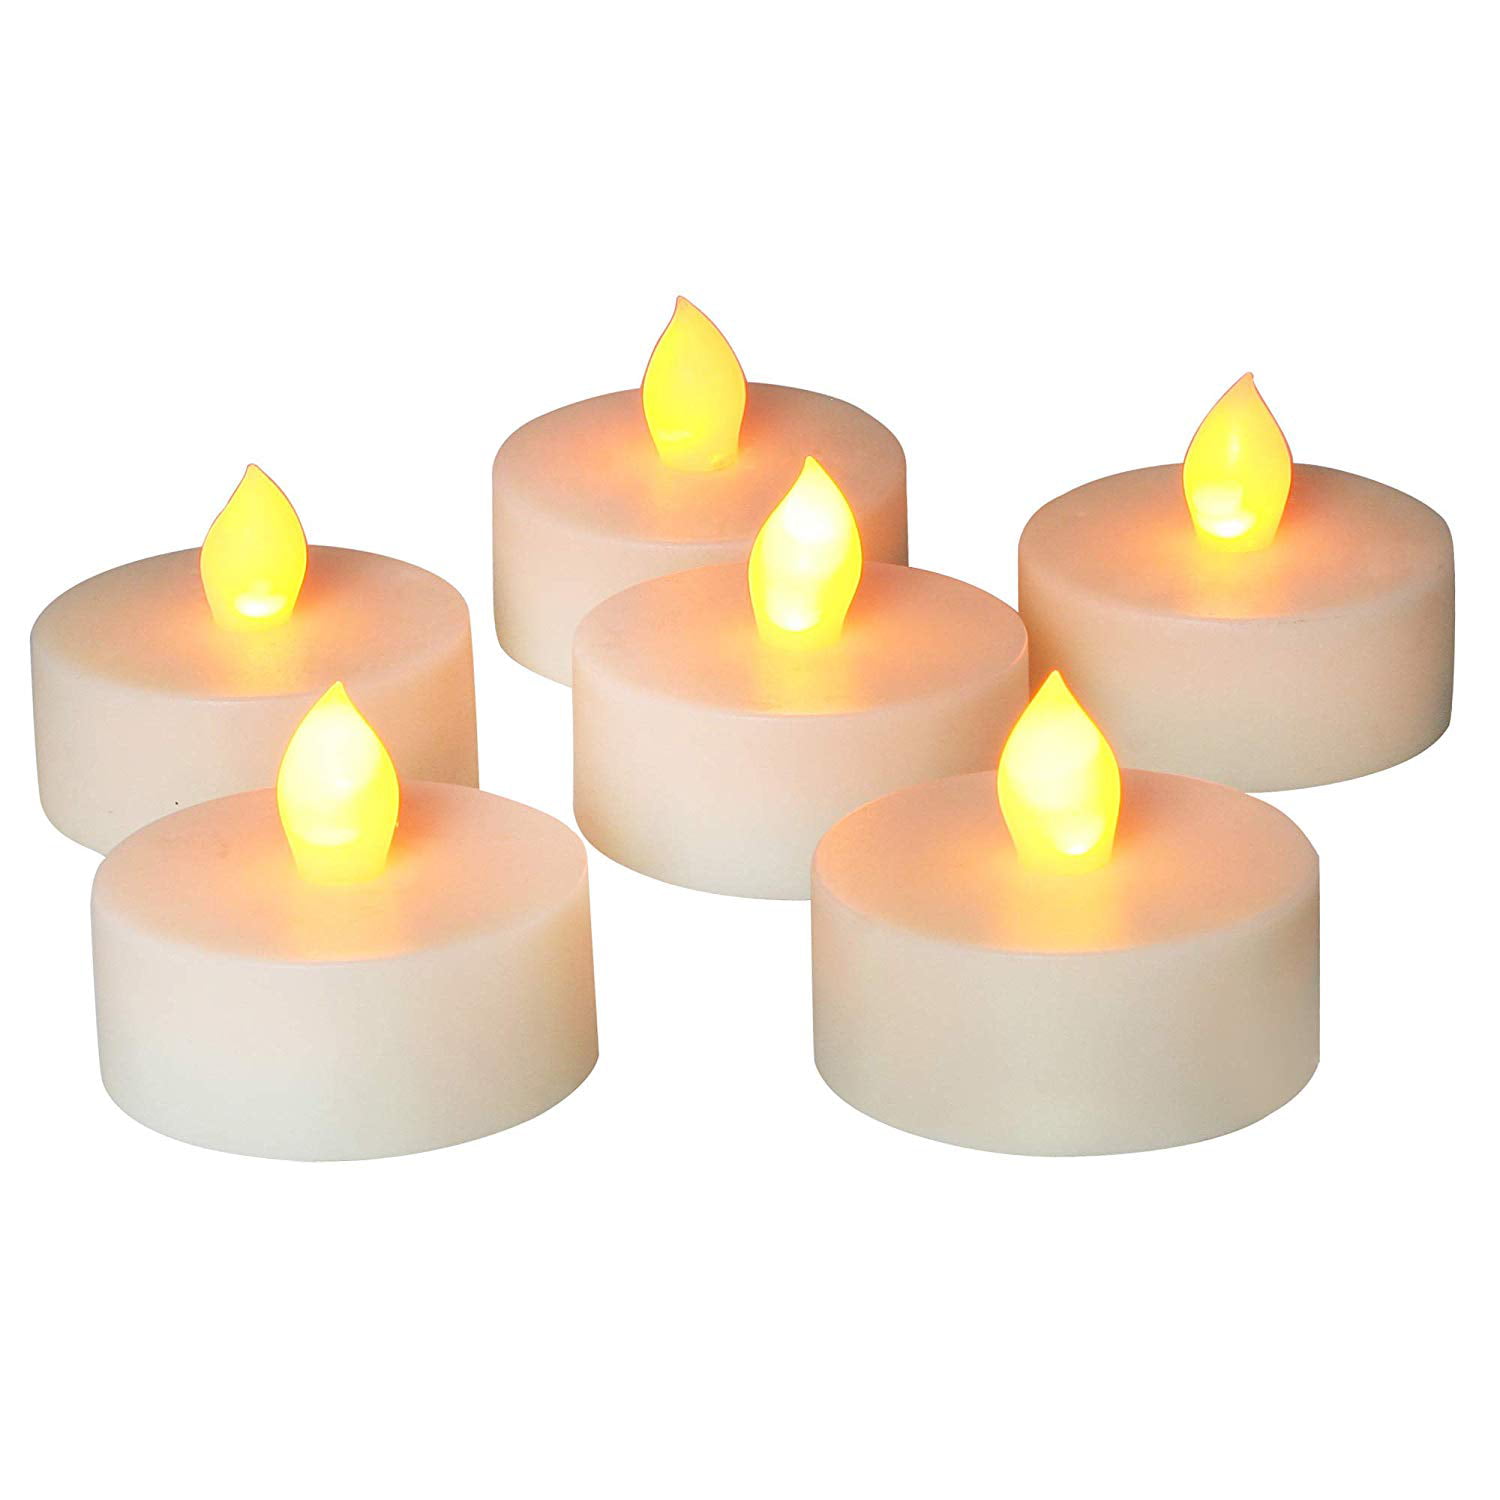 12pcs LED Tea Lights Battery Operated Flickering Flameless Candles w/ Timer New 